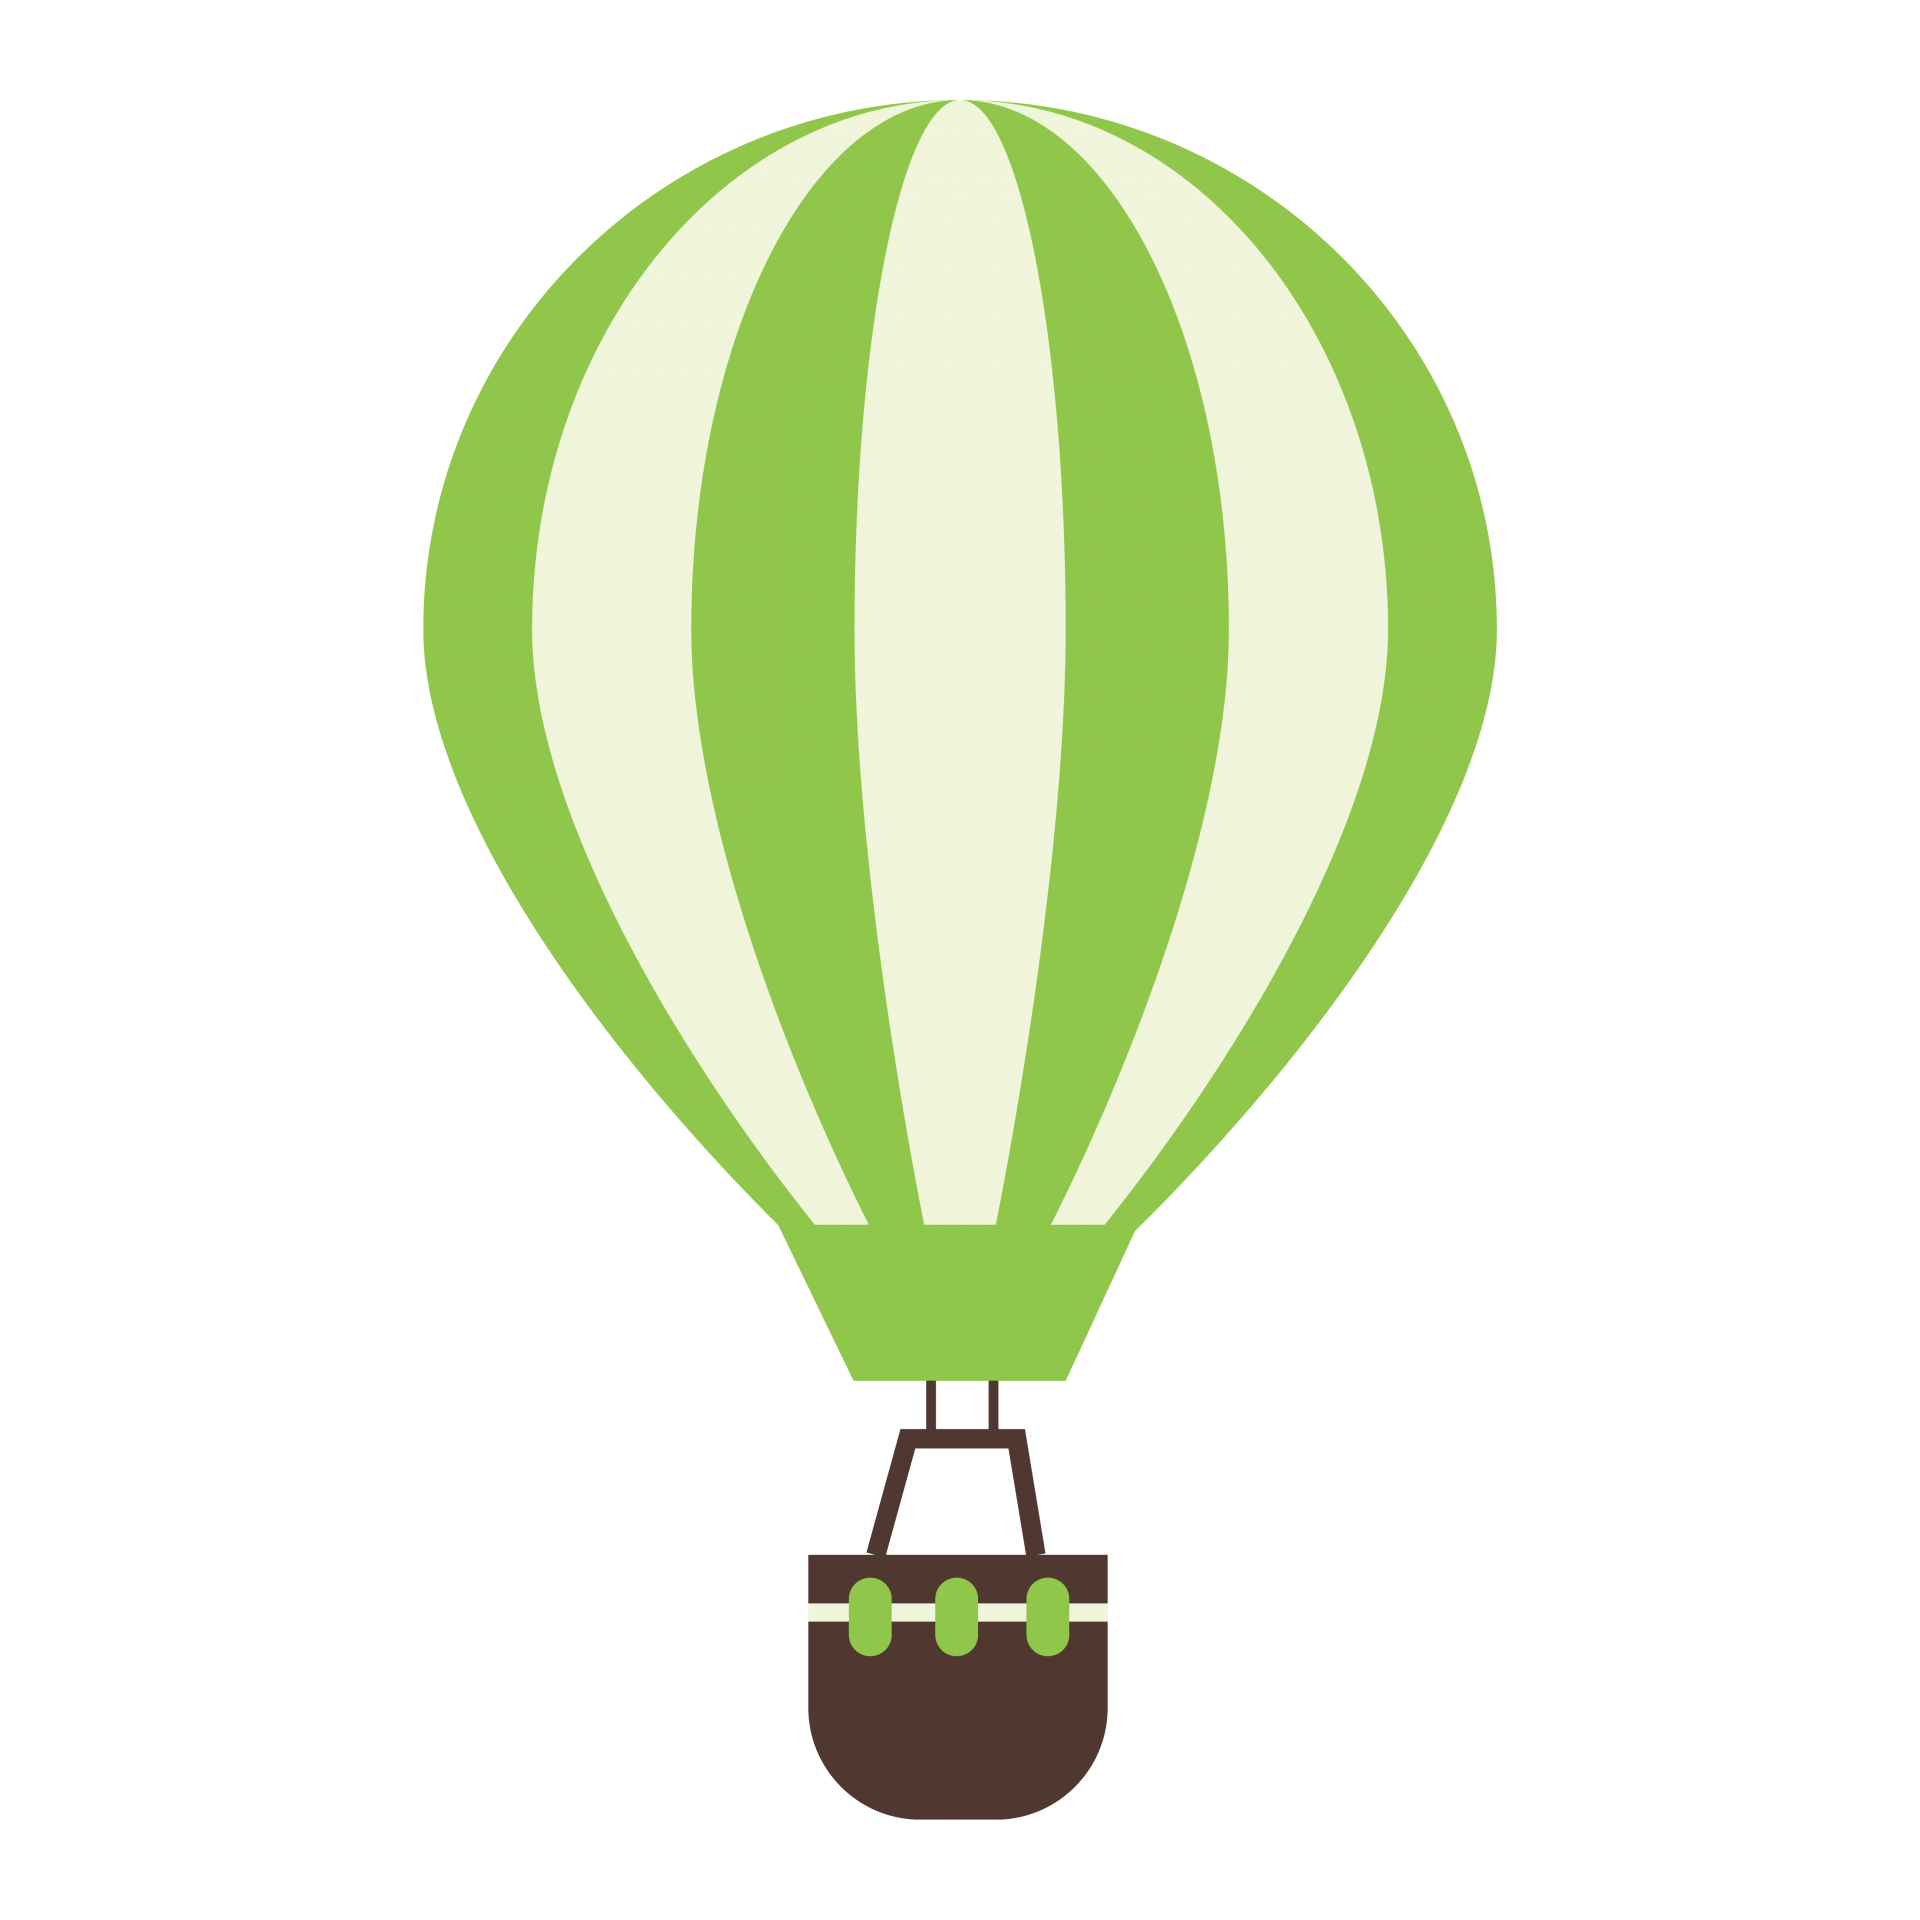 Green and white hot air balloon illustration clipart on transparent png background